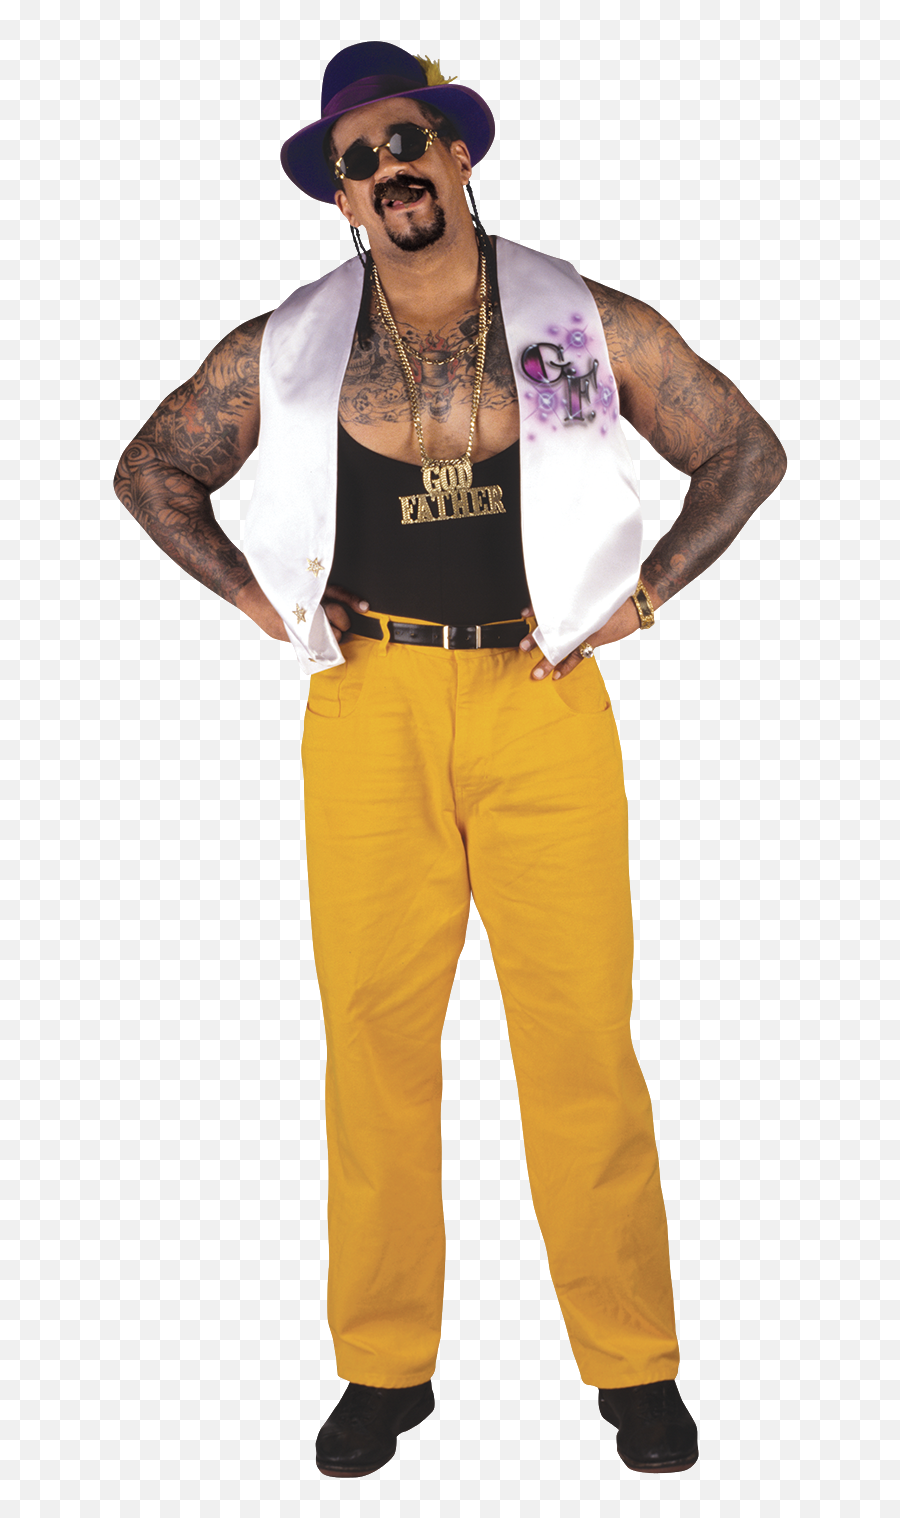 Godfather Wwe Png Transparent - Costume,Godfather Png